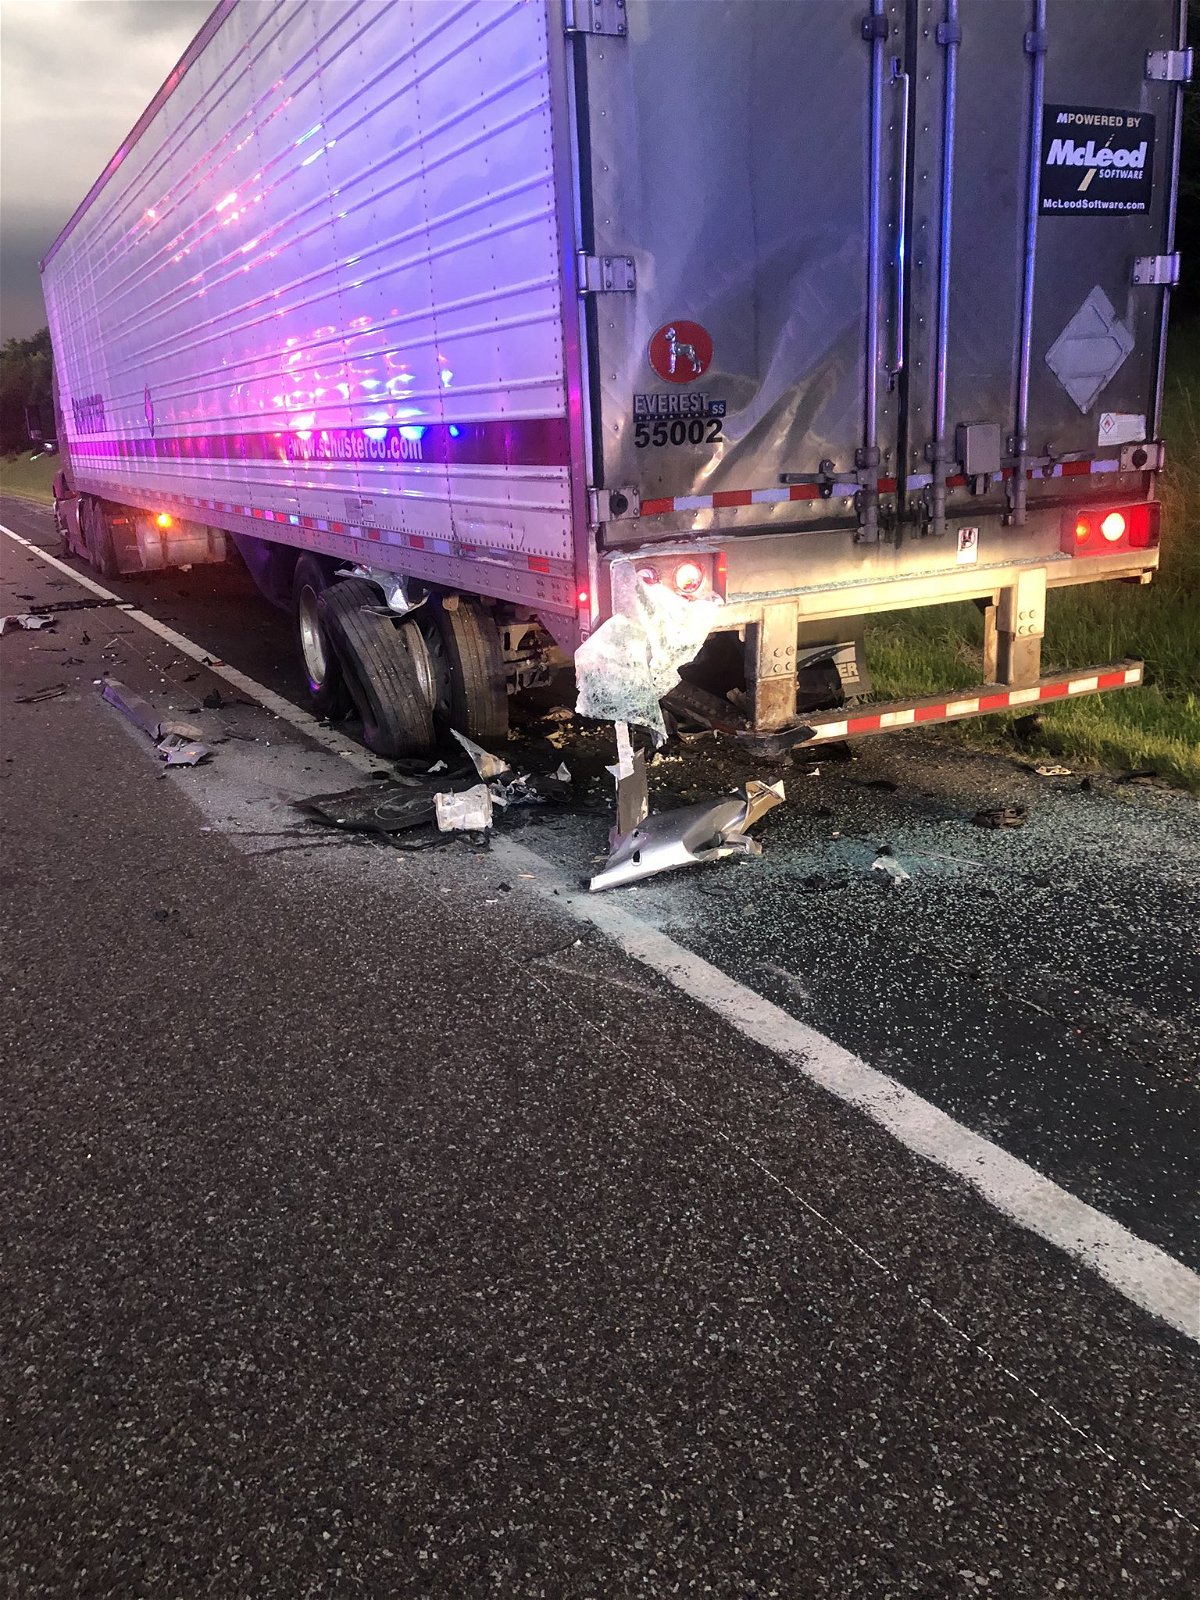 The Boone County Fire Protection District responded to a crash involving a tractor-trailer Friday morning.